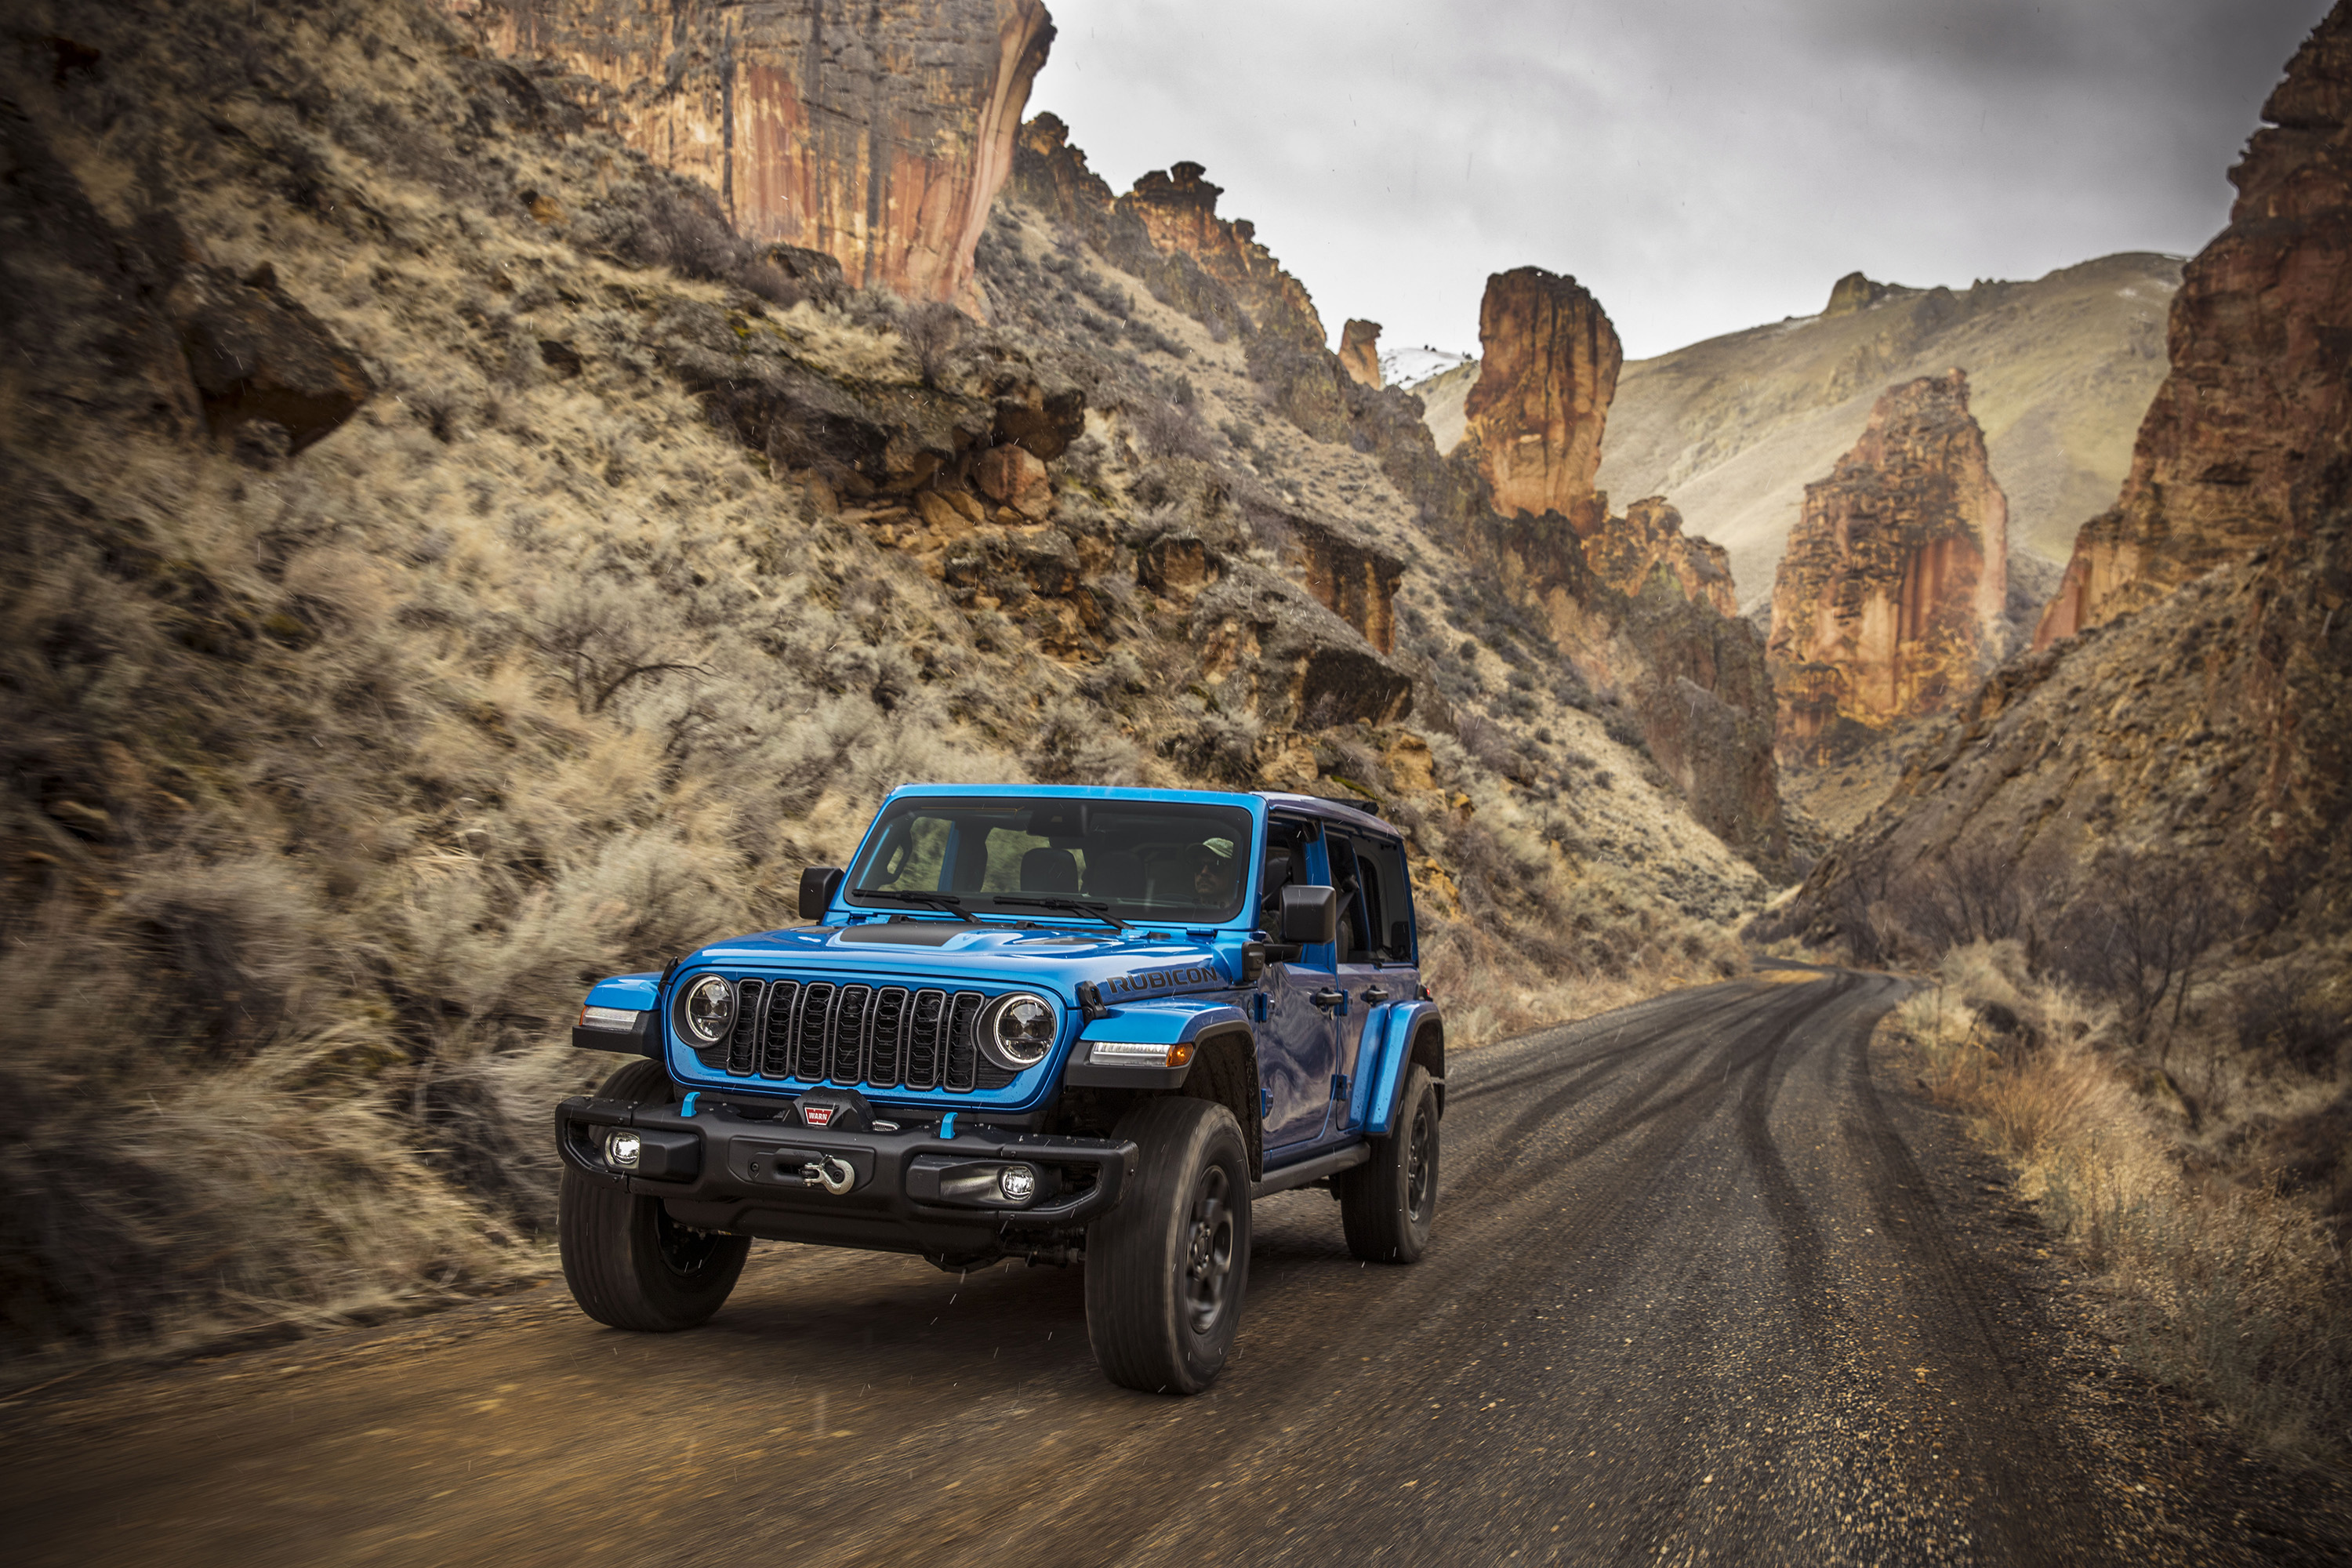 Auto review: Jeep Wrangler refresh is 'most capable,' expands 4xe lineup